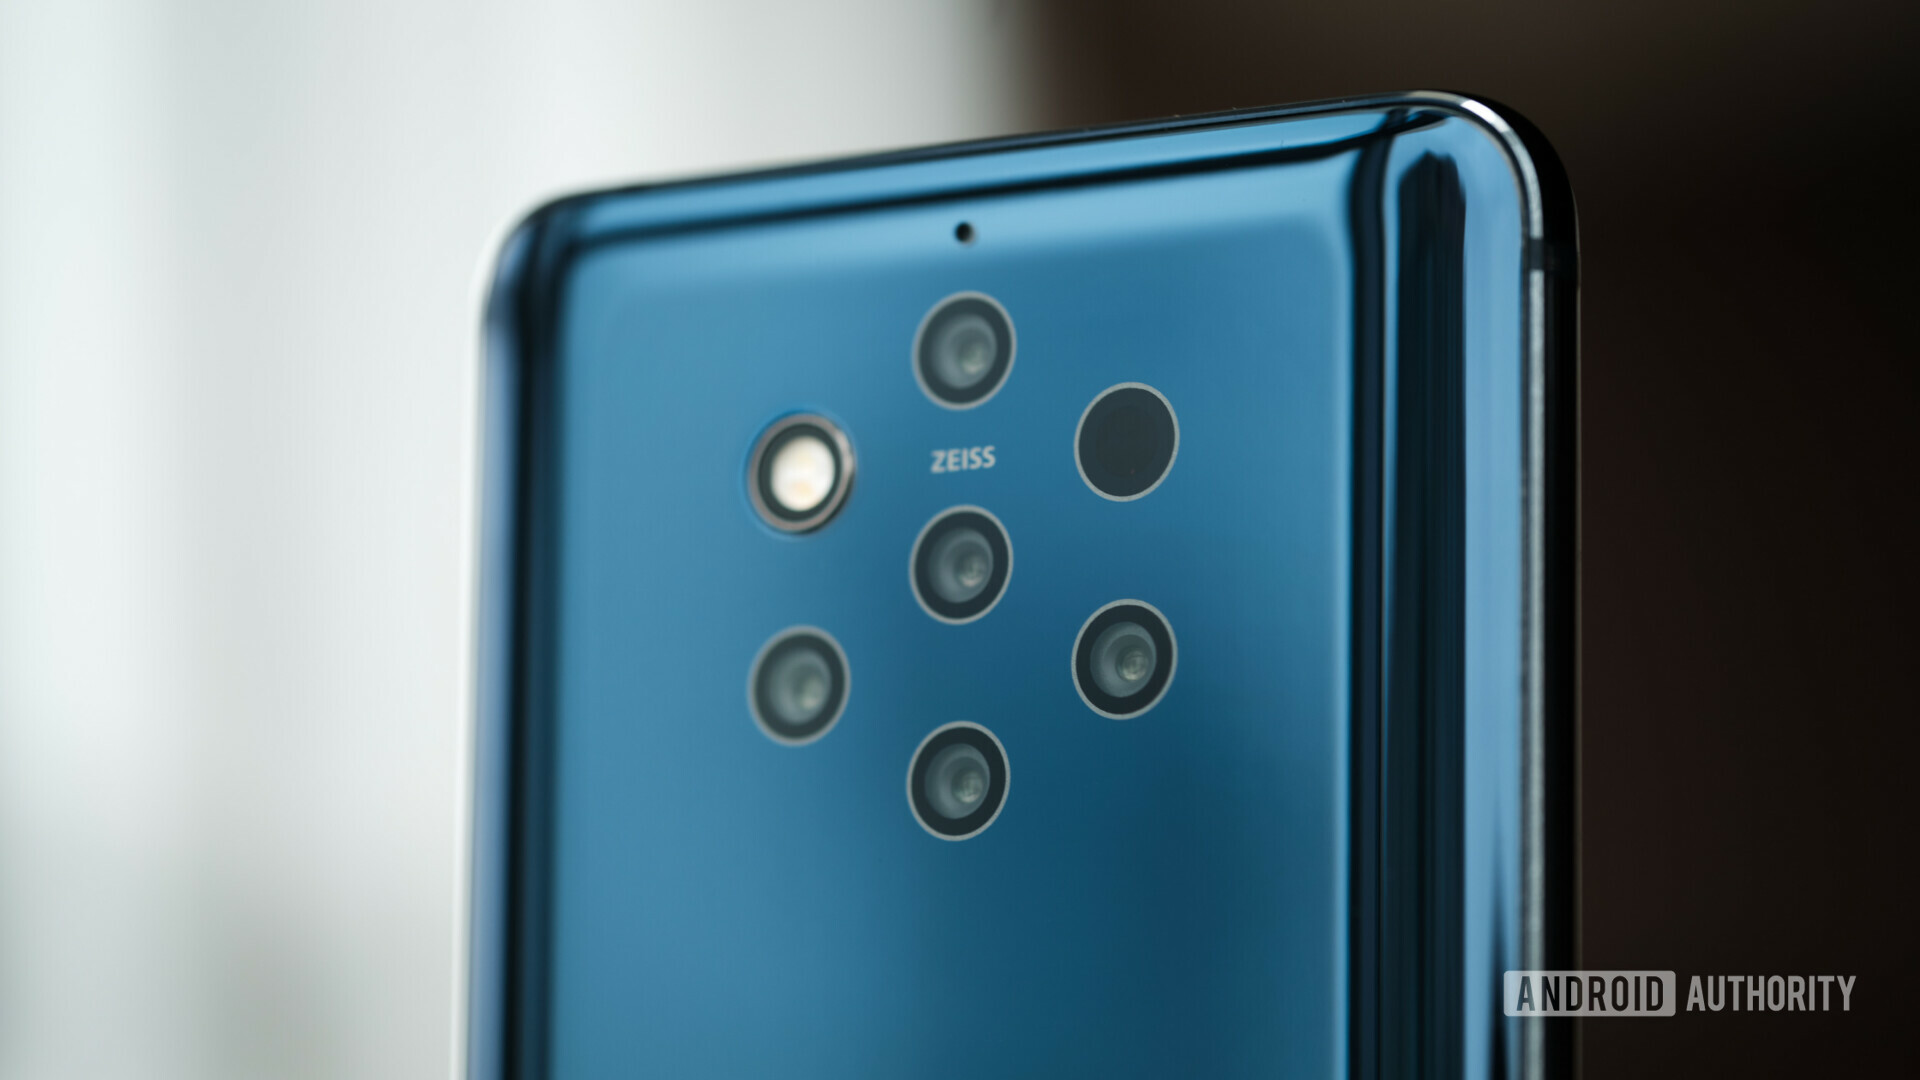 Backside of the Nokia 9 PureView showing the five camera setup